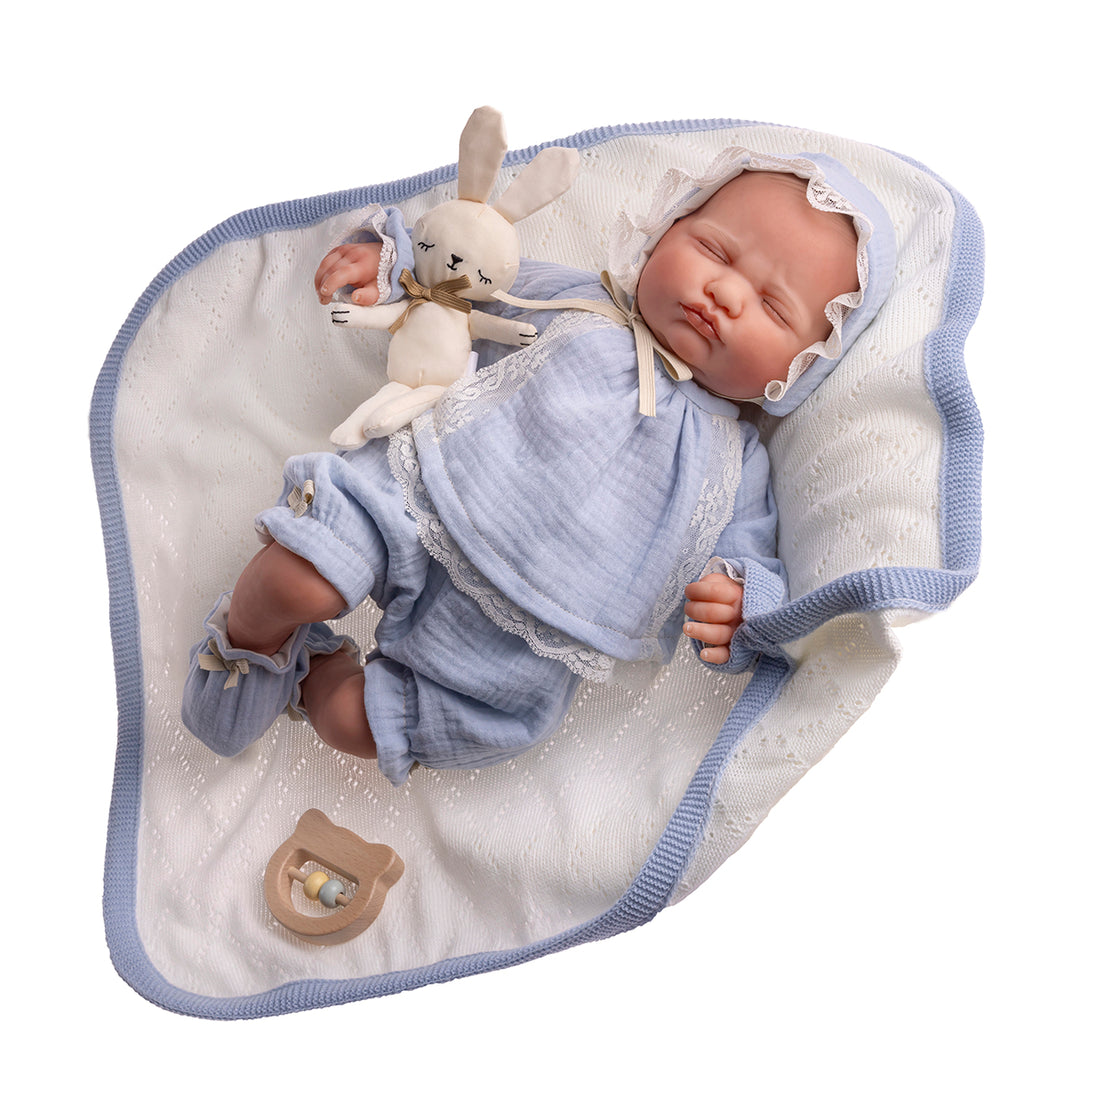 Reborn Doll | Weighted &amp; Hand Painted Soft Vinyl | Limited Edition | Mateo | Blue